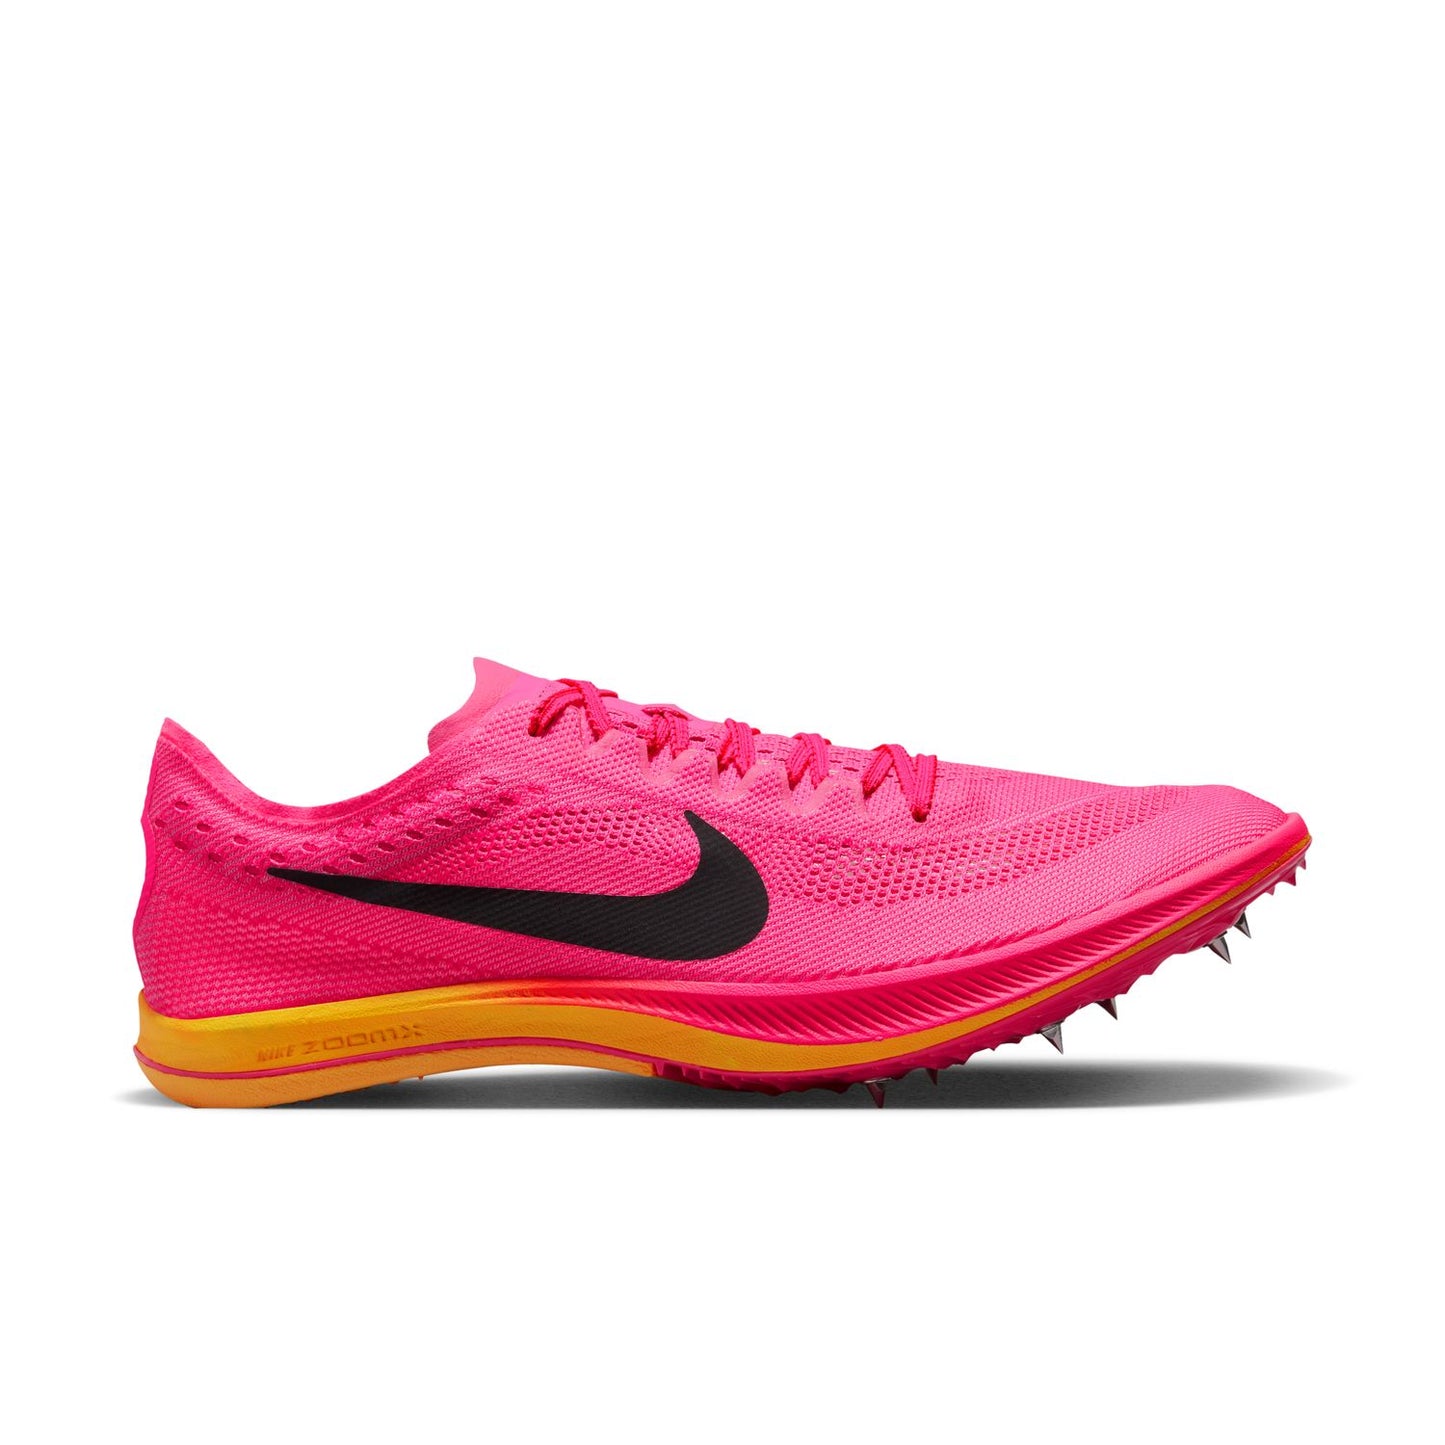 Unisex Nike ZoomX Dragonfly Hyper Pink